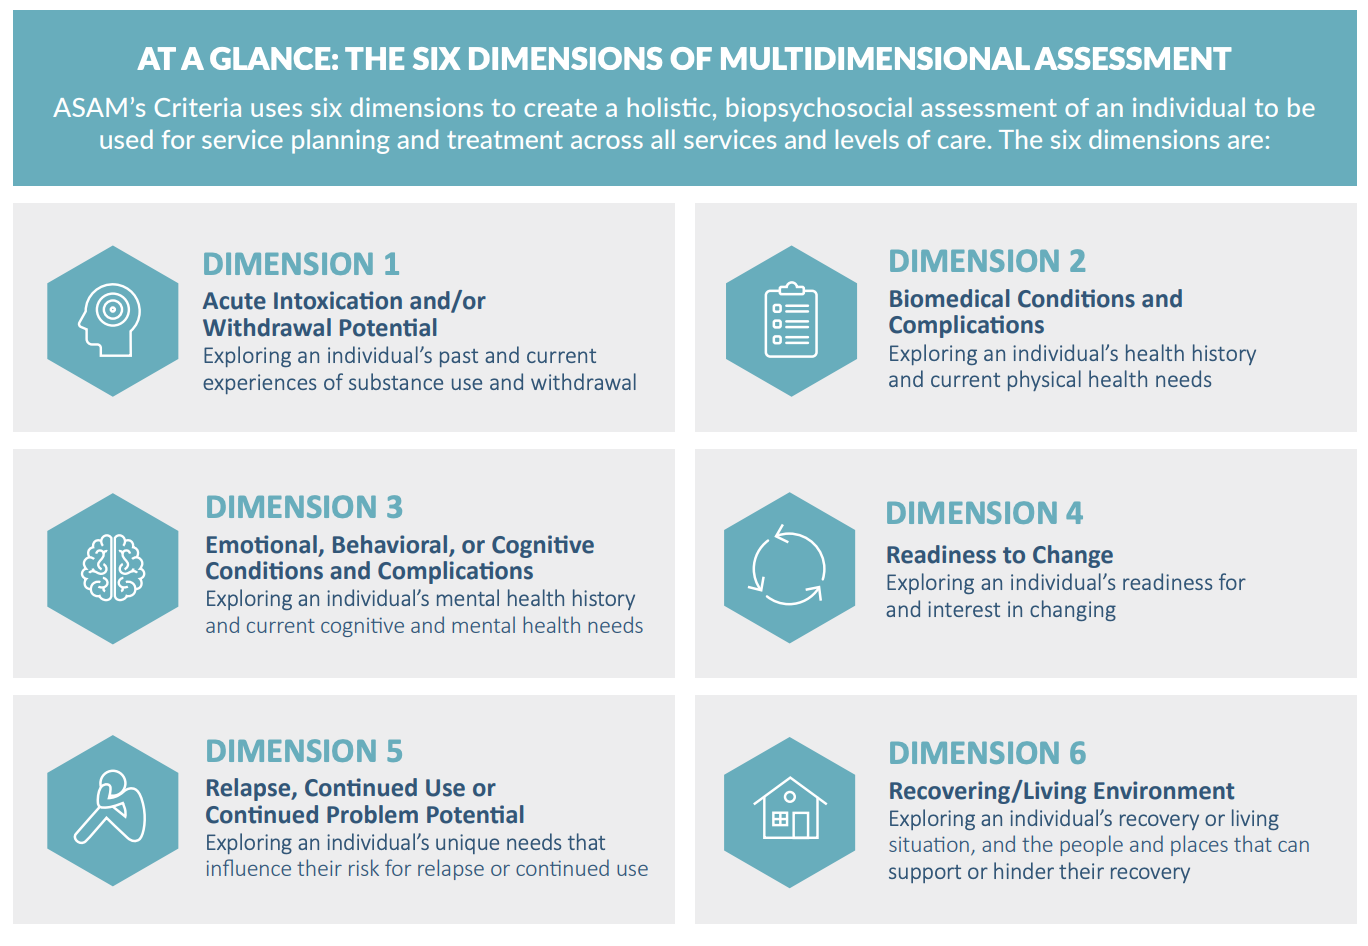 Dimensions of care assessment